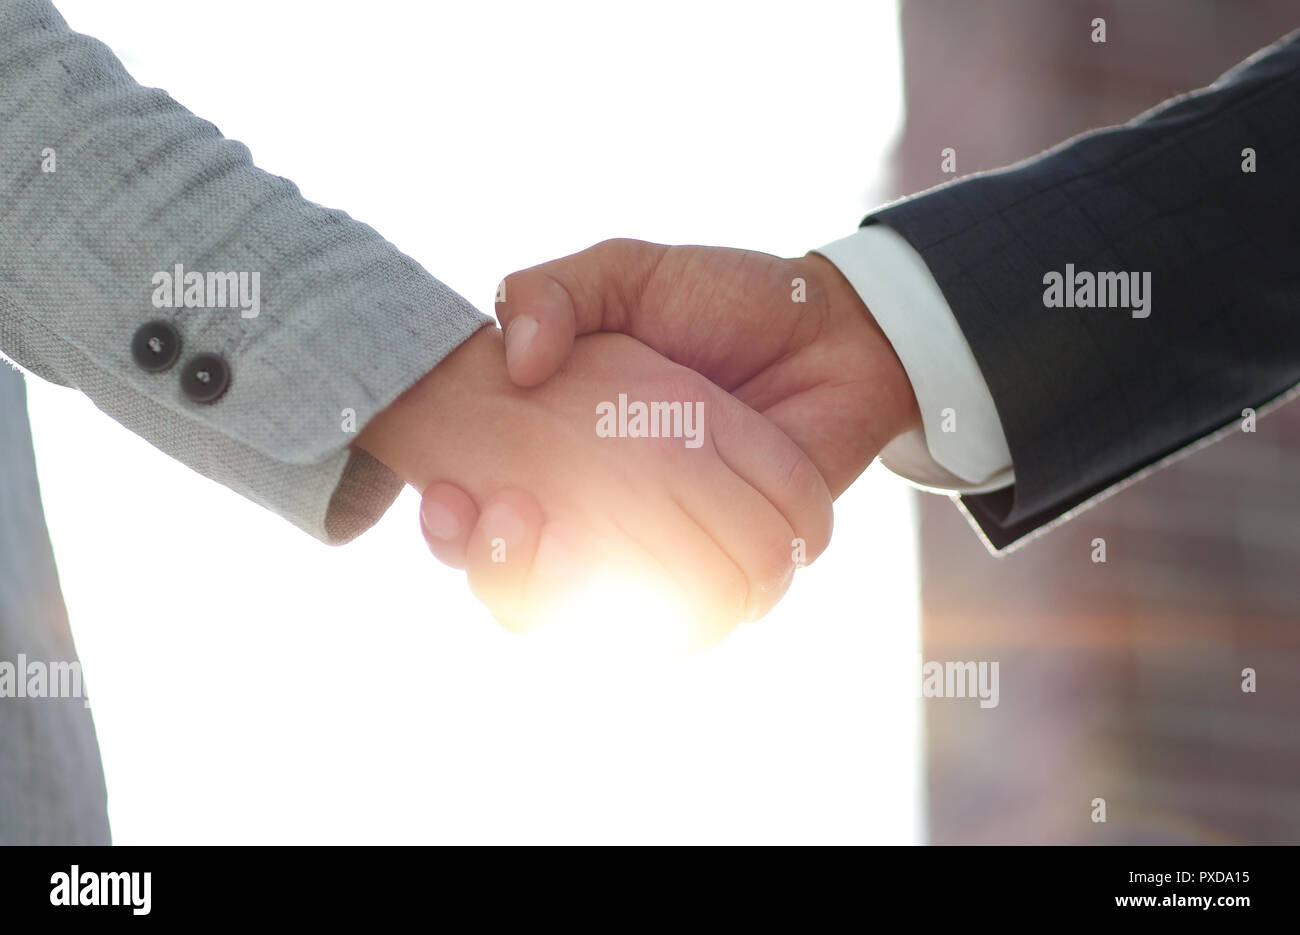 Business people shaking hands isolated on white background Stock Photo